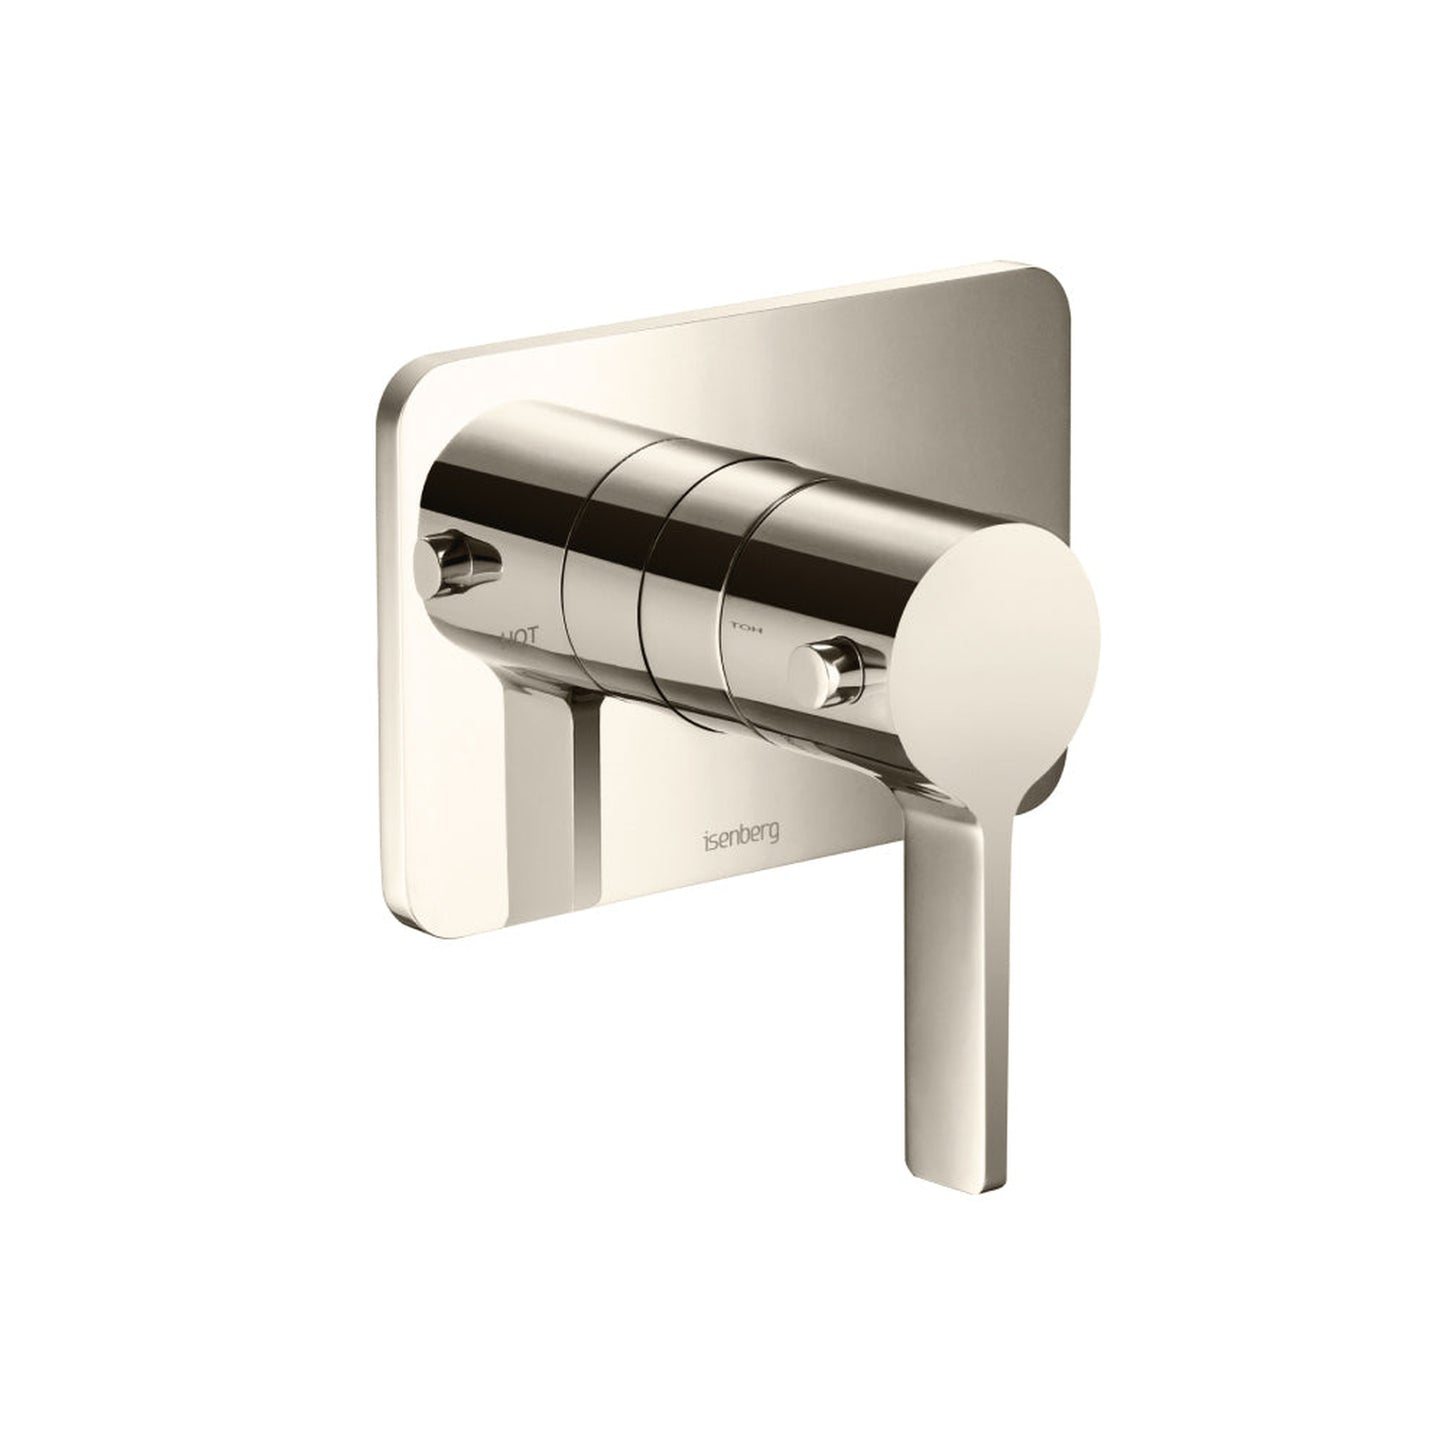 Isenberg Serie 260 3/4" Single Output Thermostatic Valve With Trim in Polished Nickel